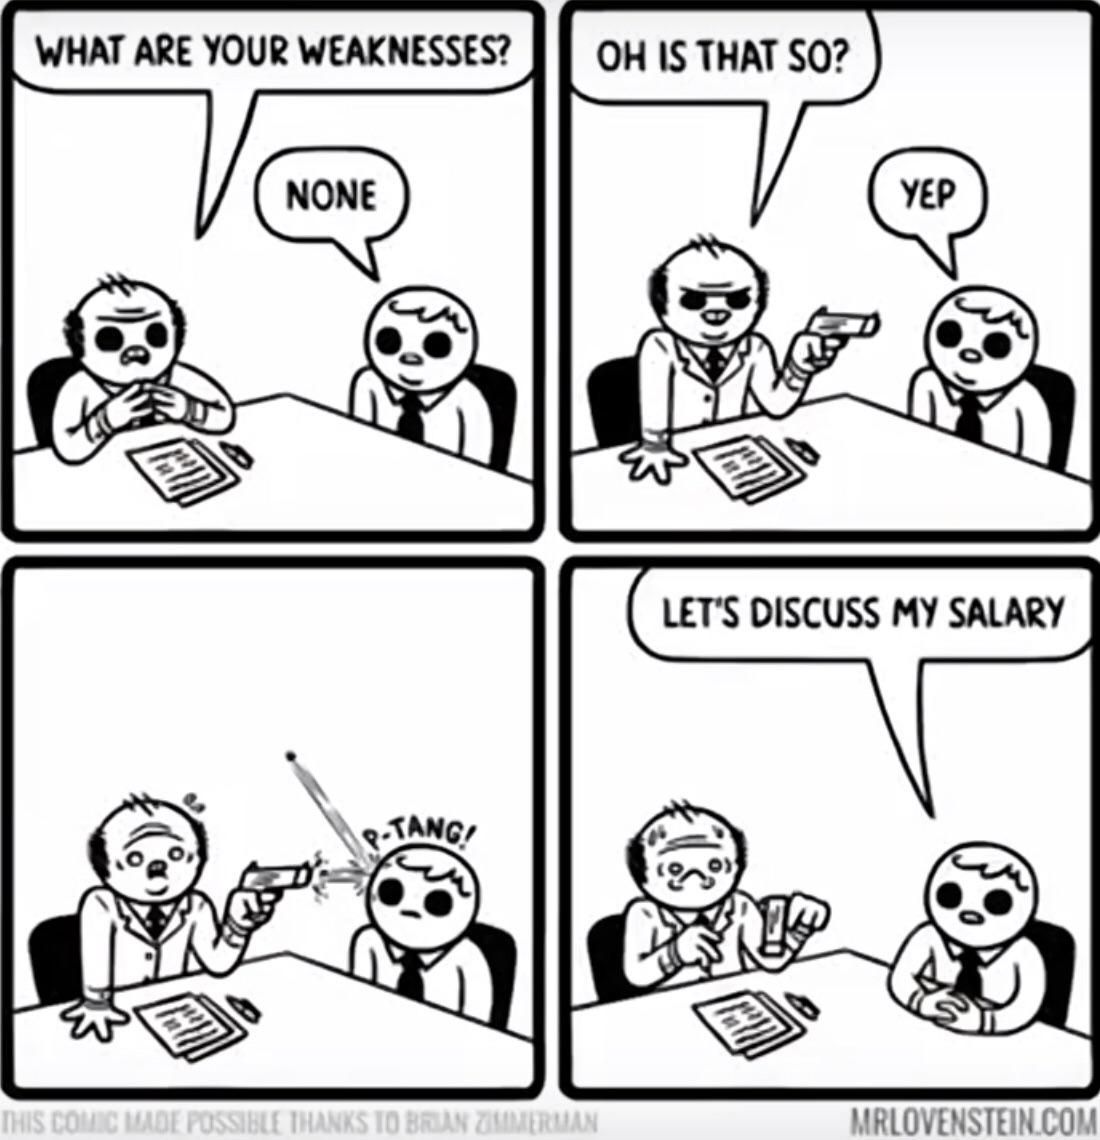 Yes I'd like to discuss my salary